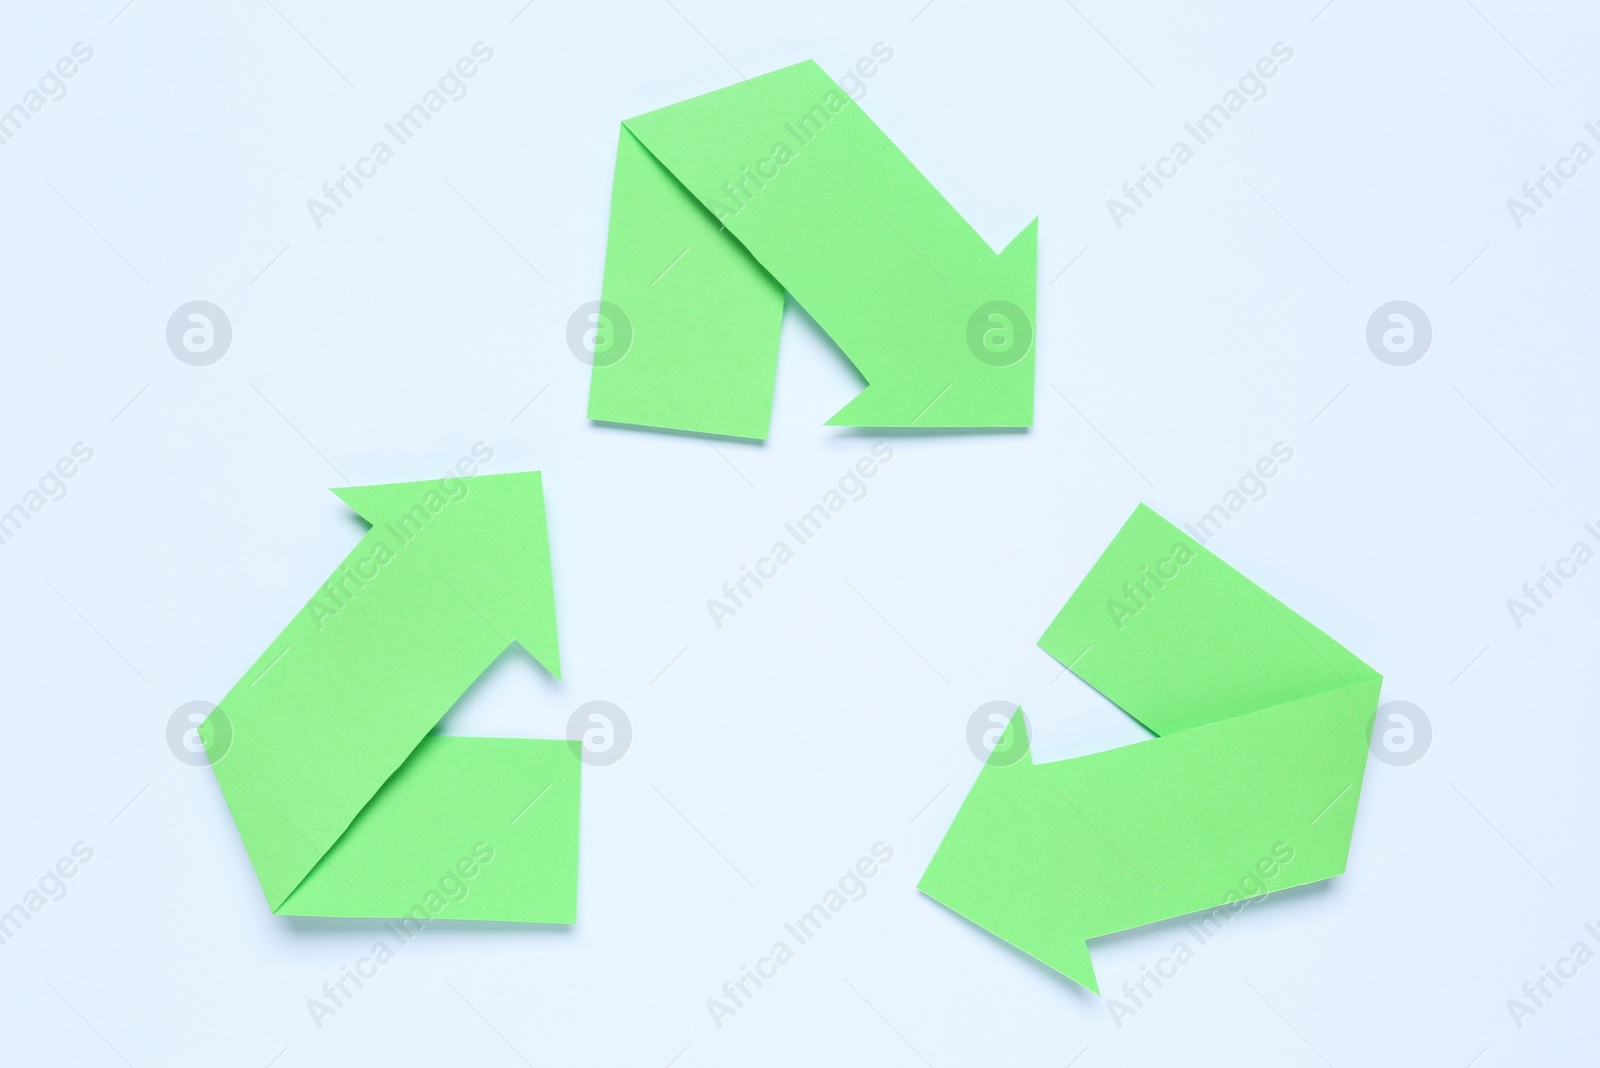 Photo of Recycling symbol made of green paper arrows on white background, top view